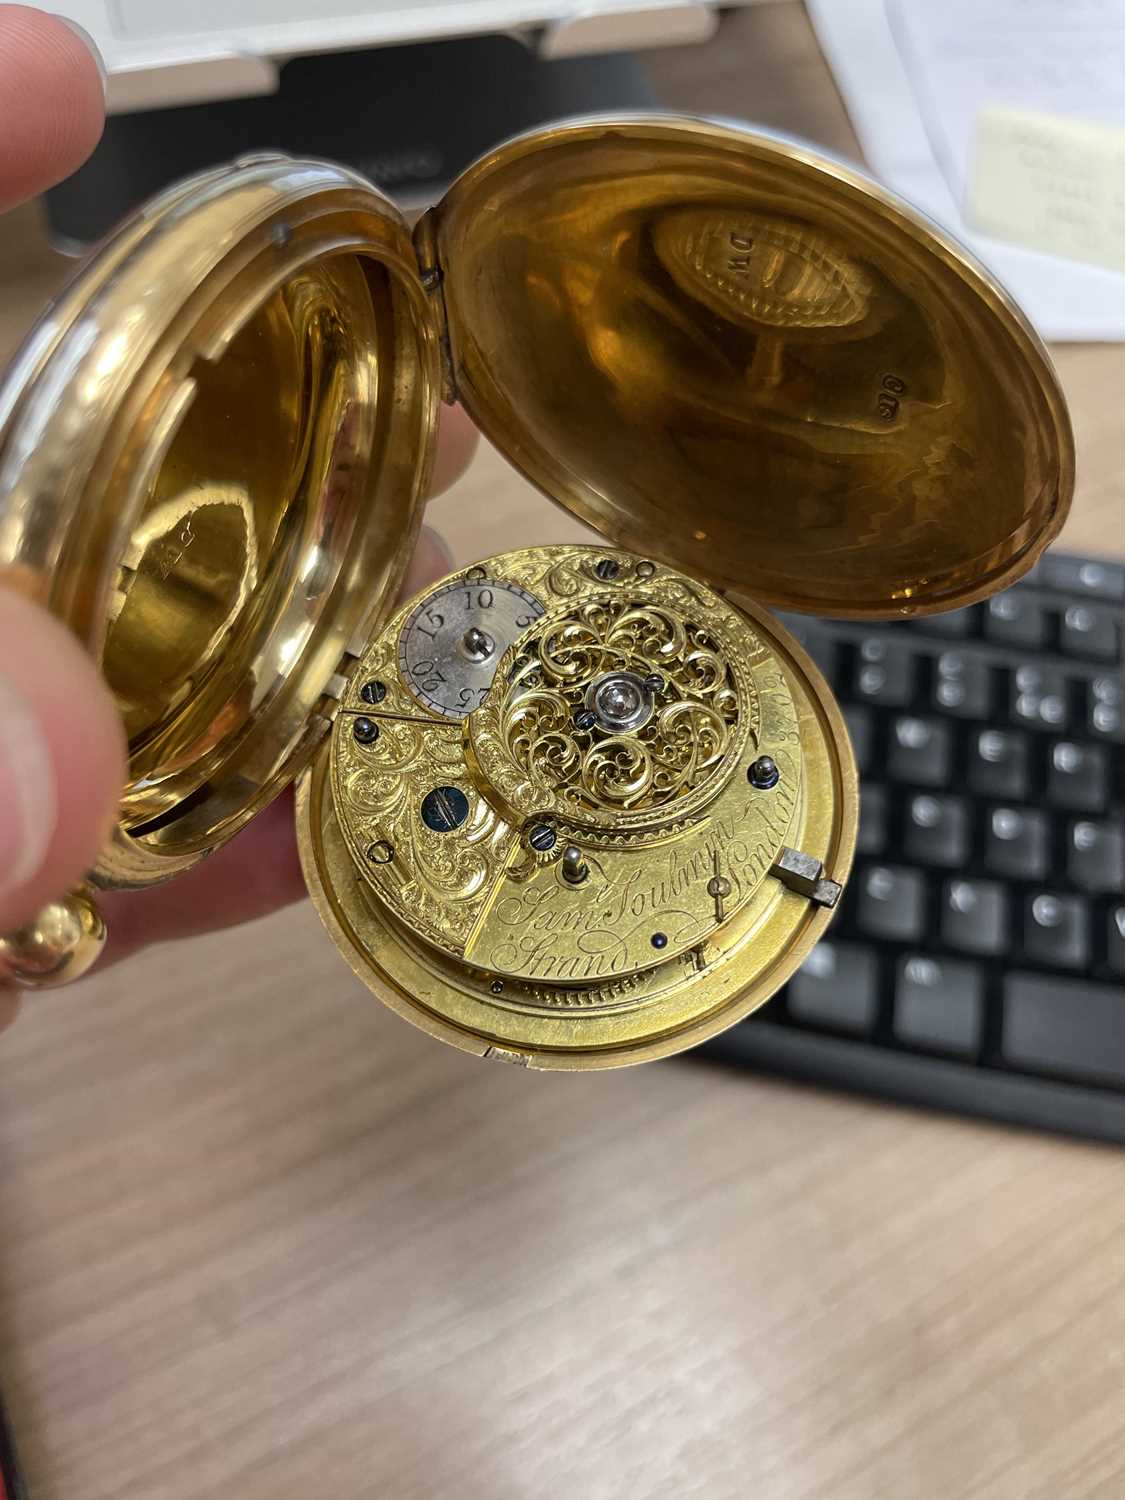 AN 18CT GOLD FULL HUNTER POCKET WATCH - Image 5 of 6